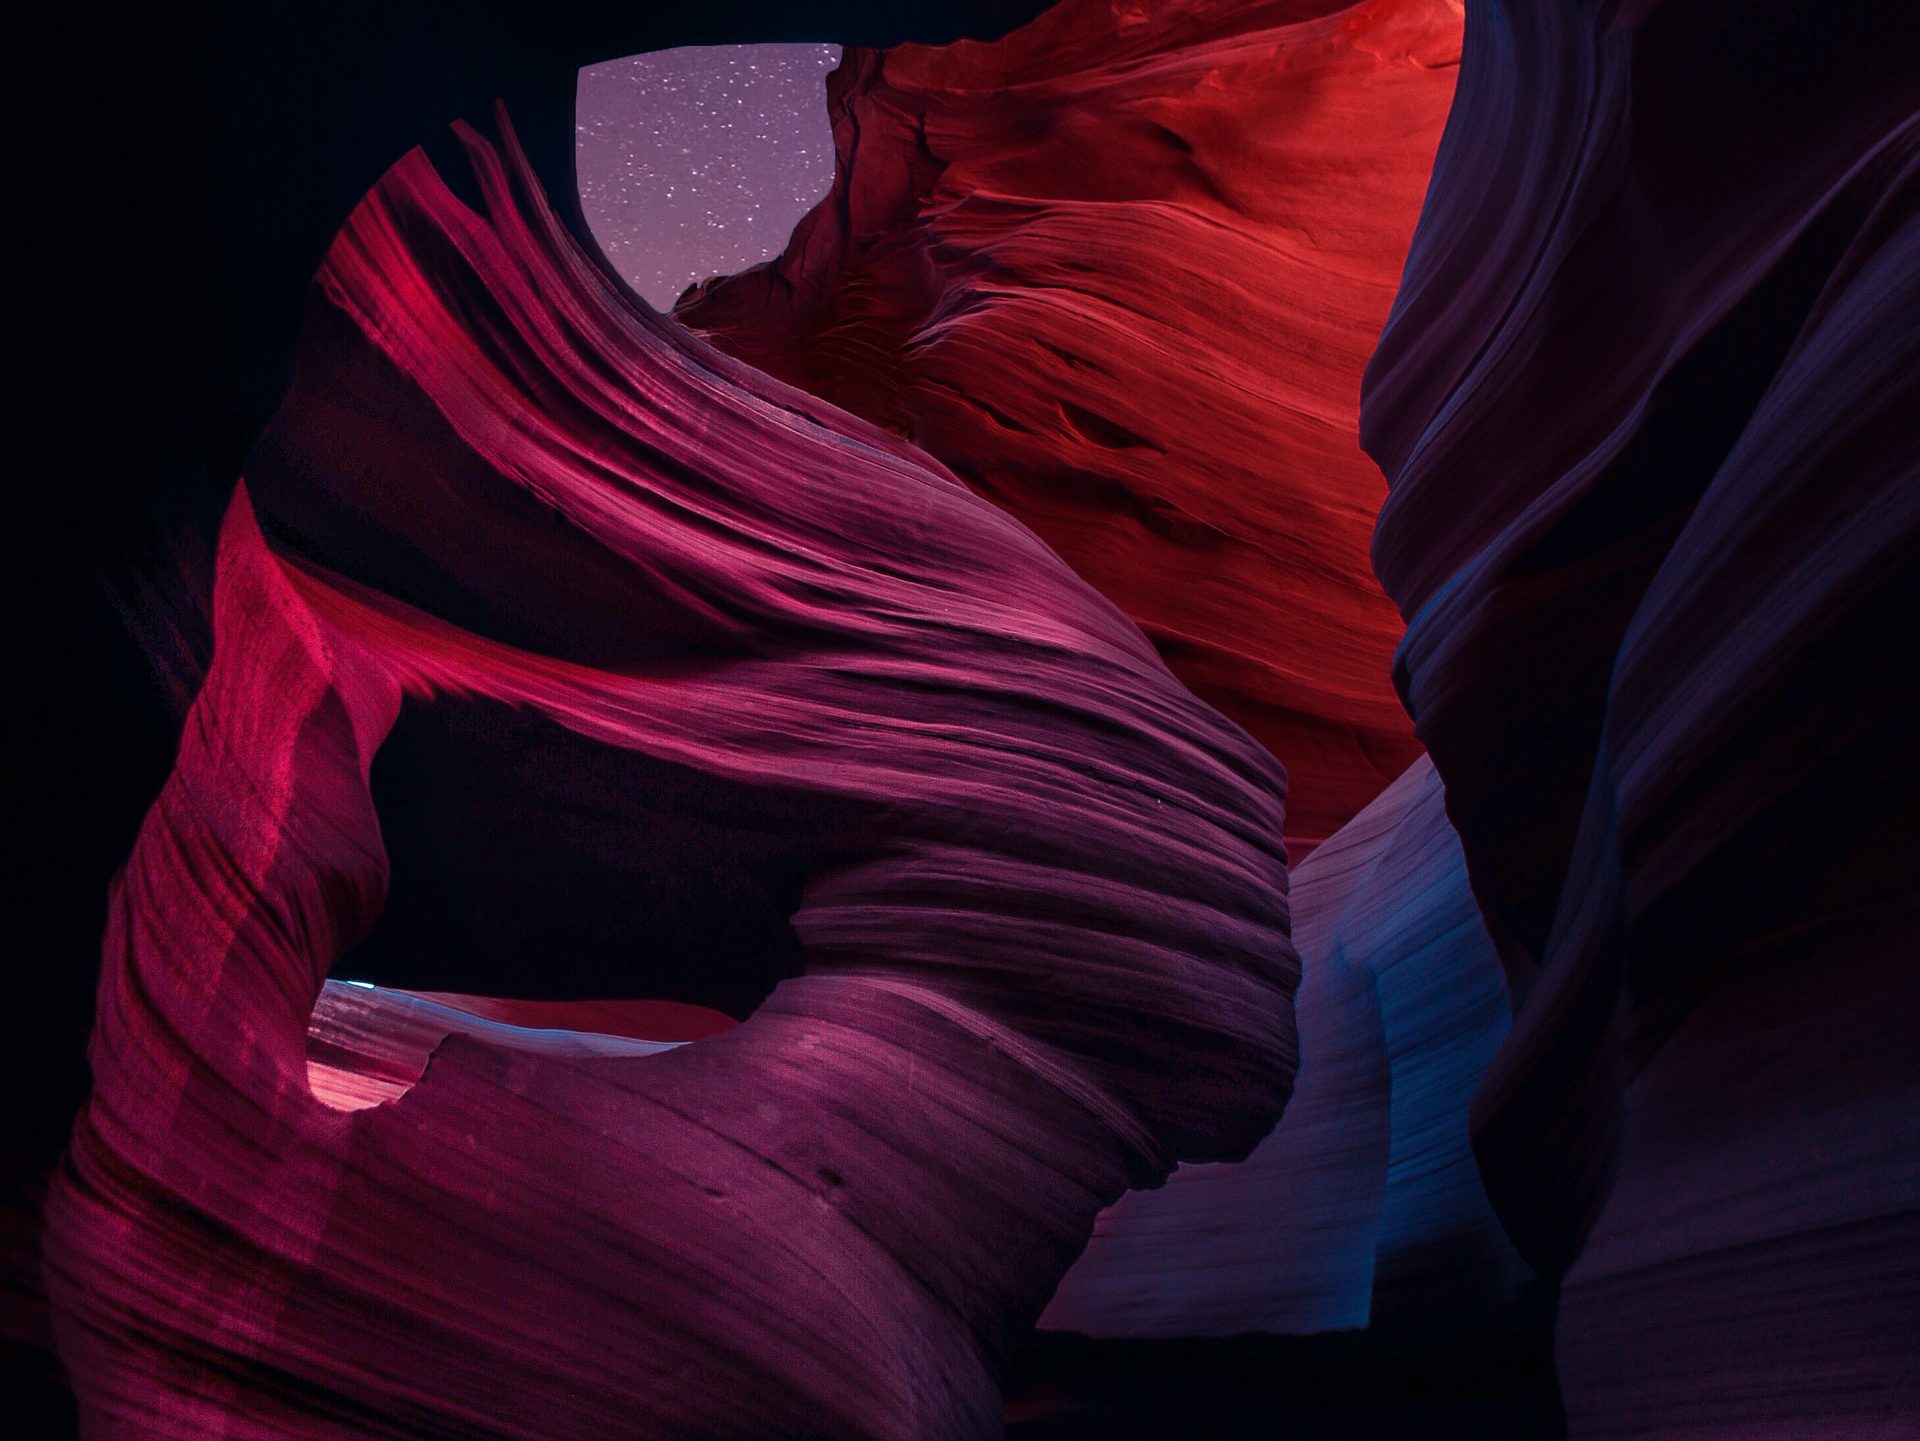 Antelope Canyon in Arizona, USA is worth to be found on your travel bucket list